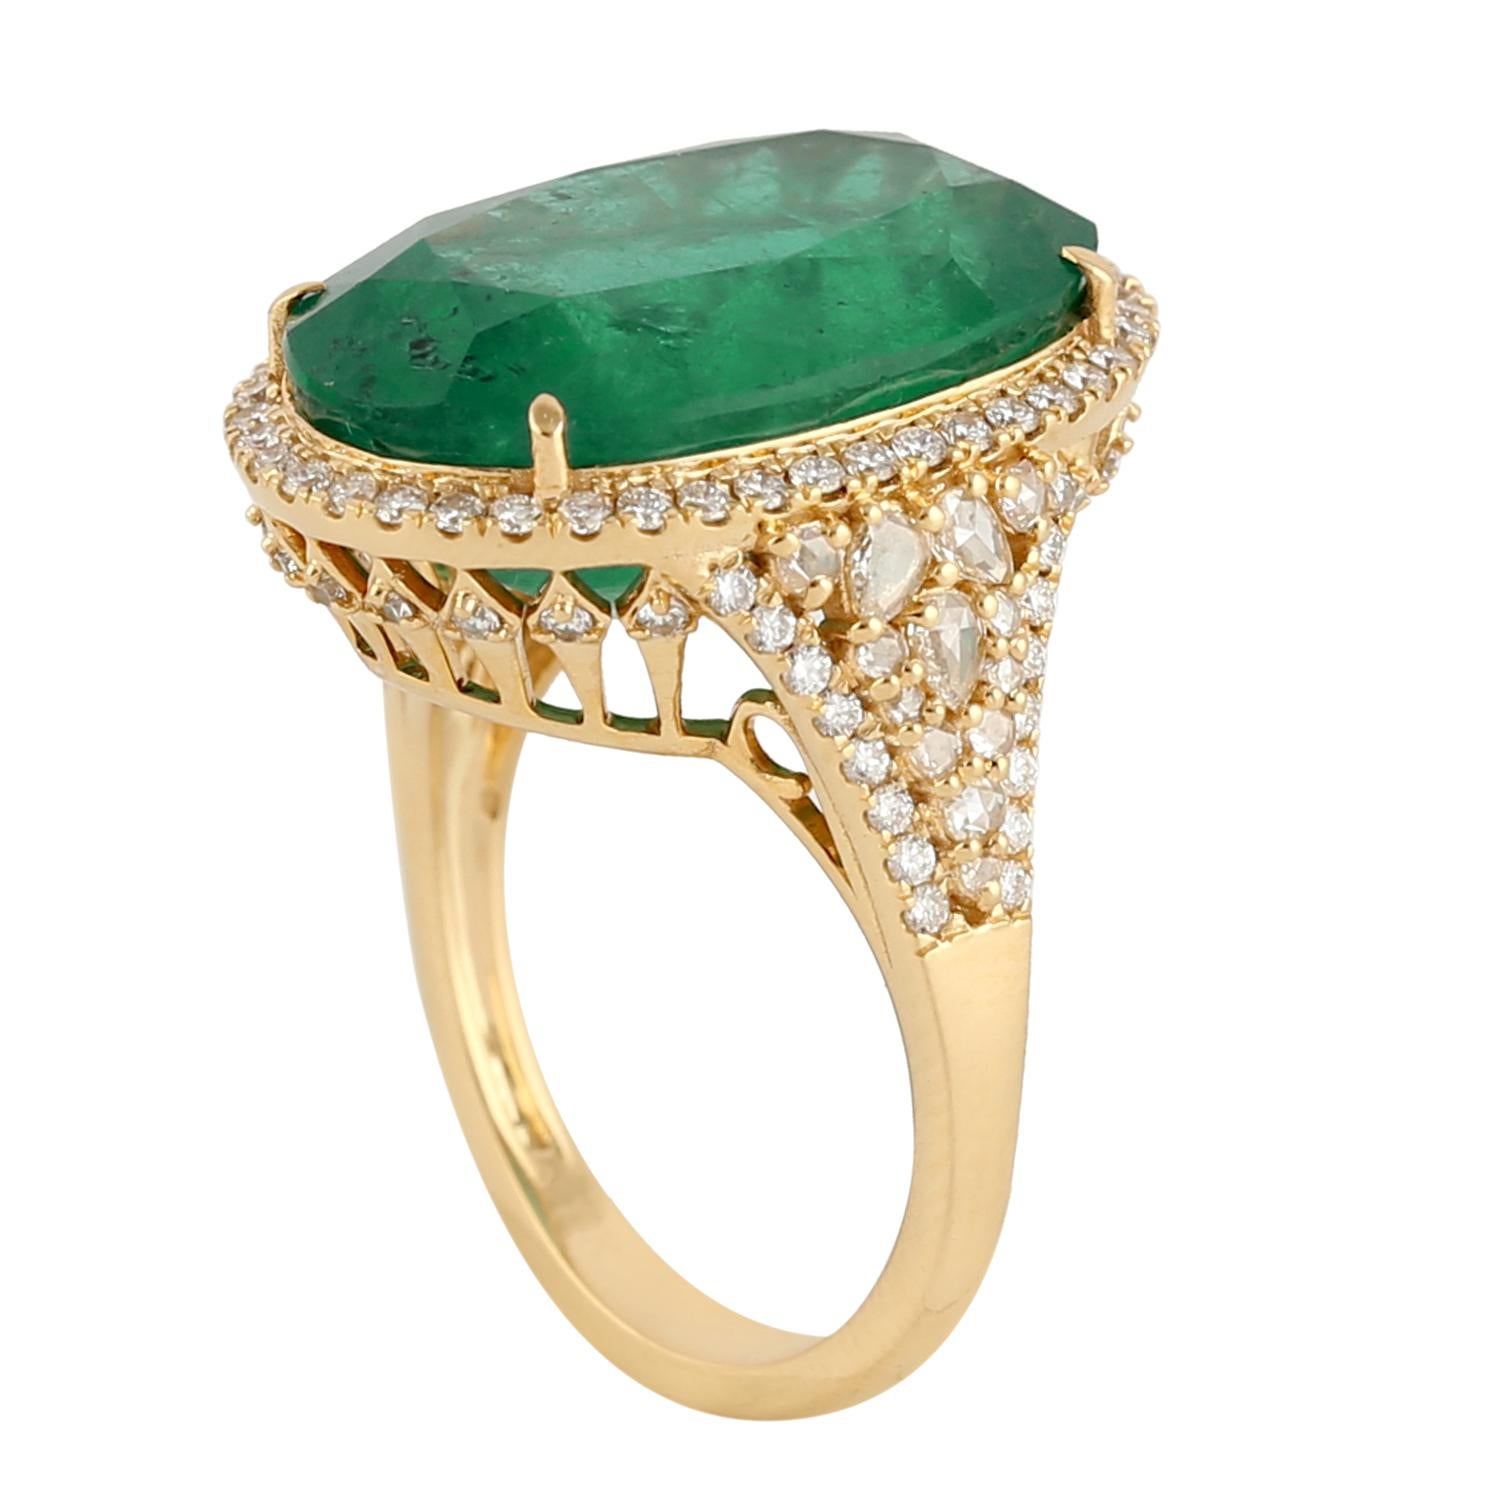 Contemporary Oval Shaped Emerald Cocktail Ring With Pave Diamonds Made In 18k Yellow Gold For Sale